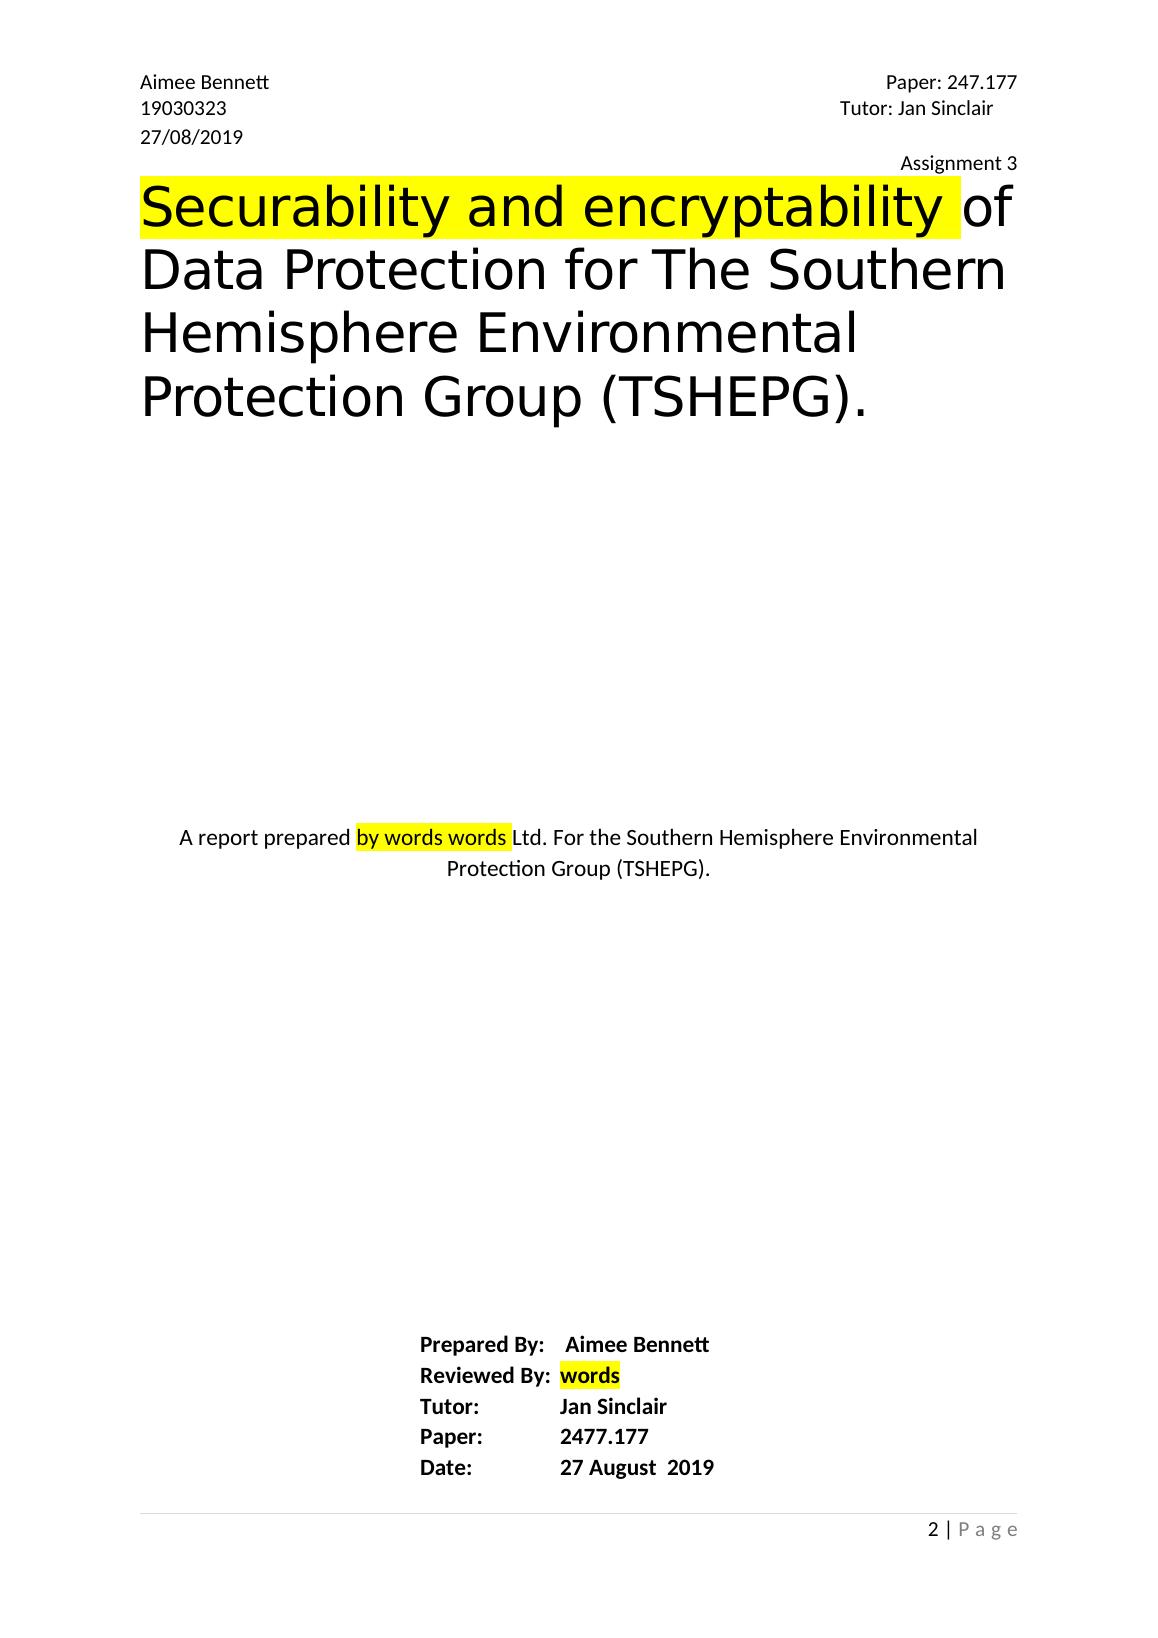 Cloud Encryption Research Report for The Southern Hemisphere Environmental Protection Group (TSHEPG)_2